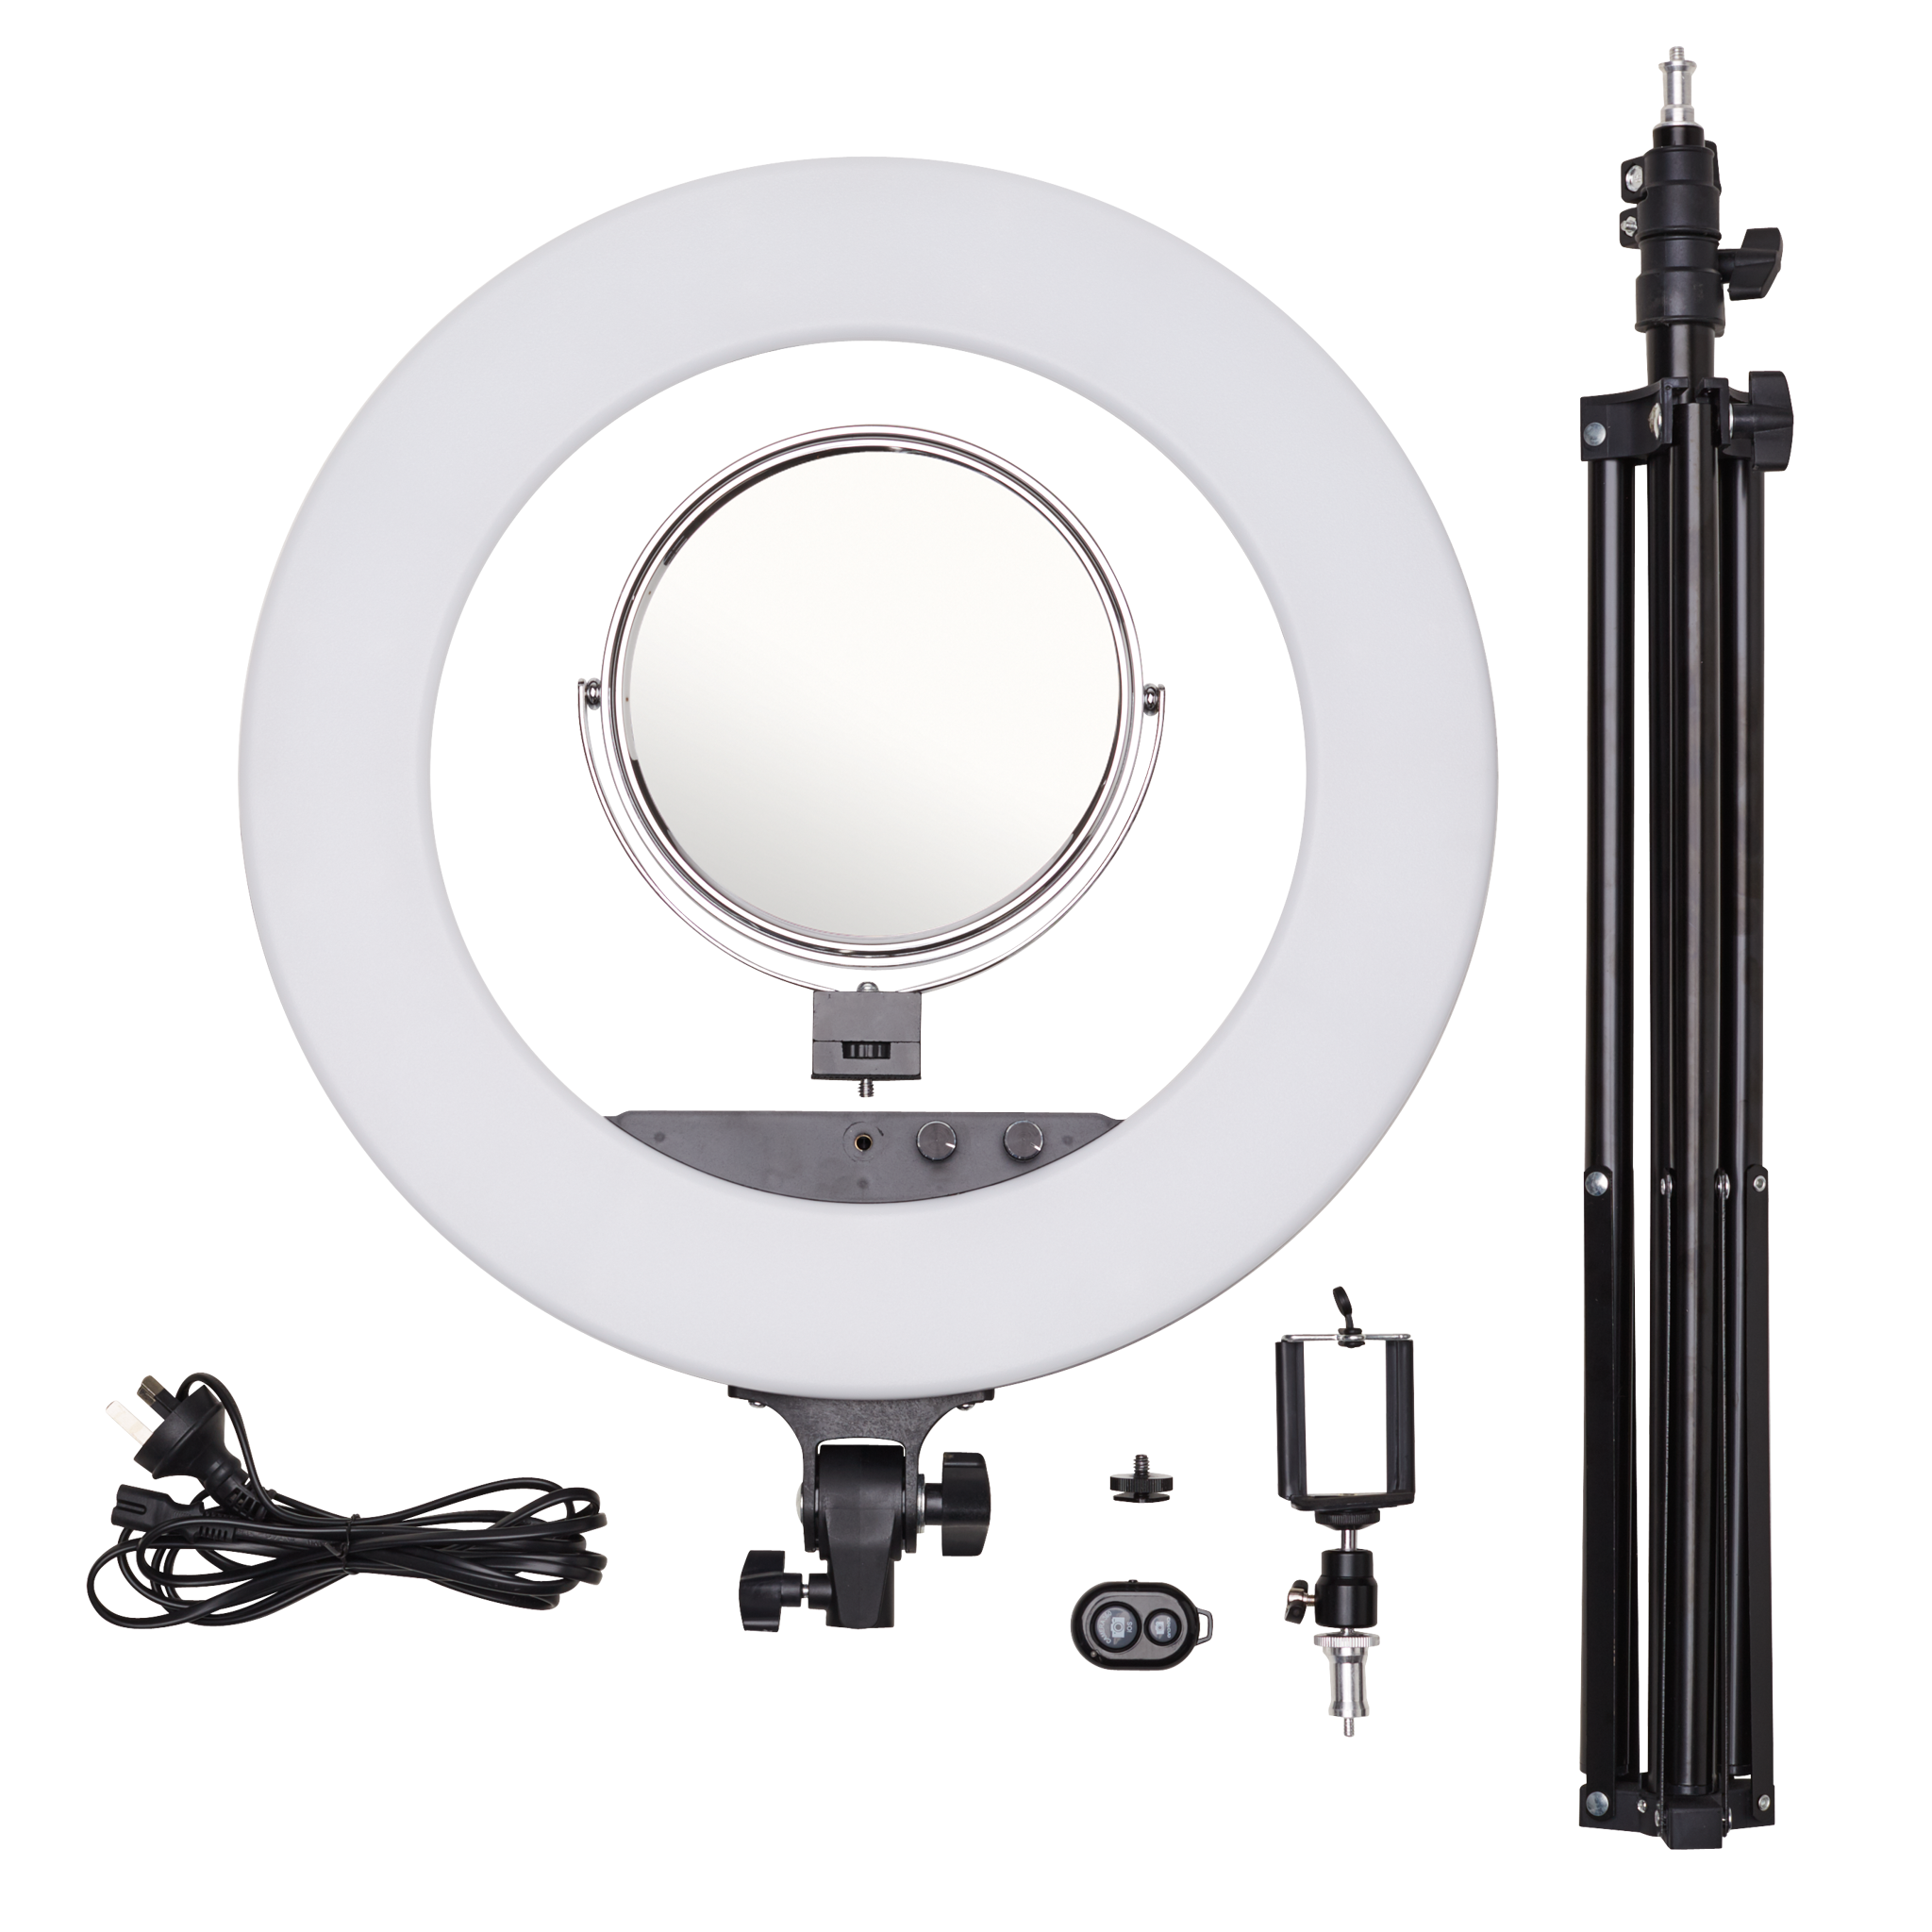 Full Kit with Separate Parts IlluminateMe 18" Ring Light by Etoile Collective